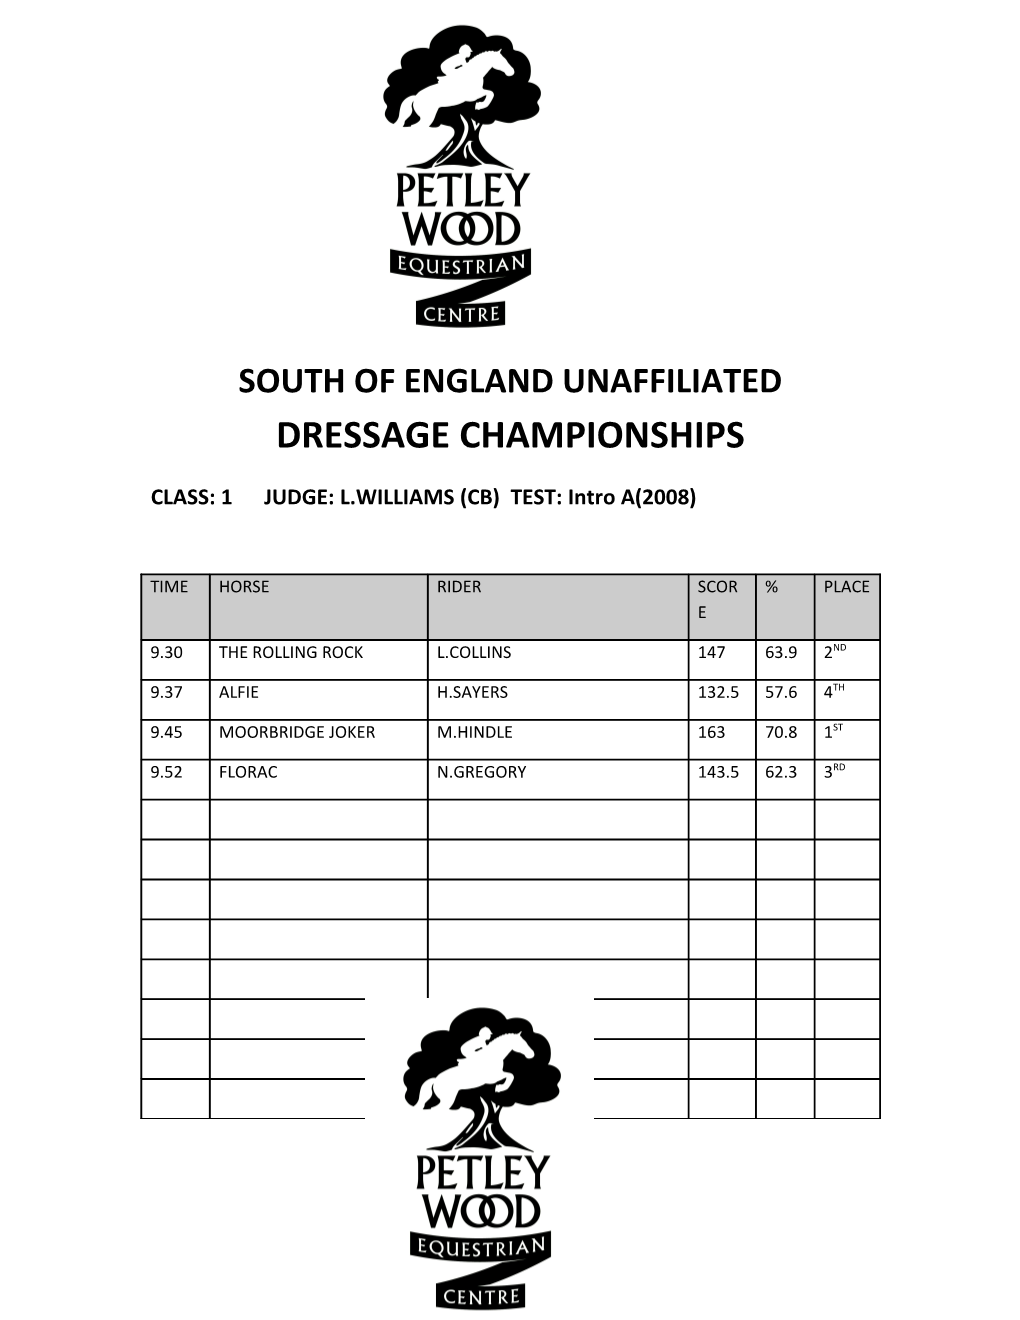 South of England Unaffiliated Dressage Championships